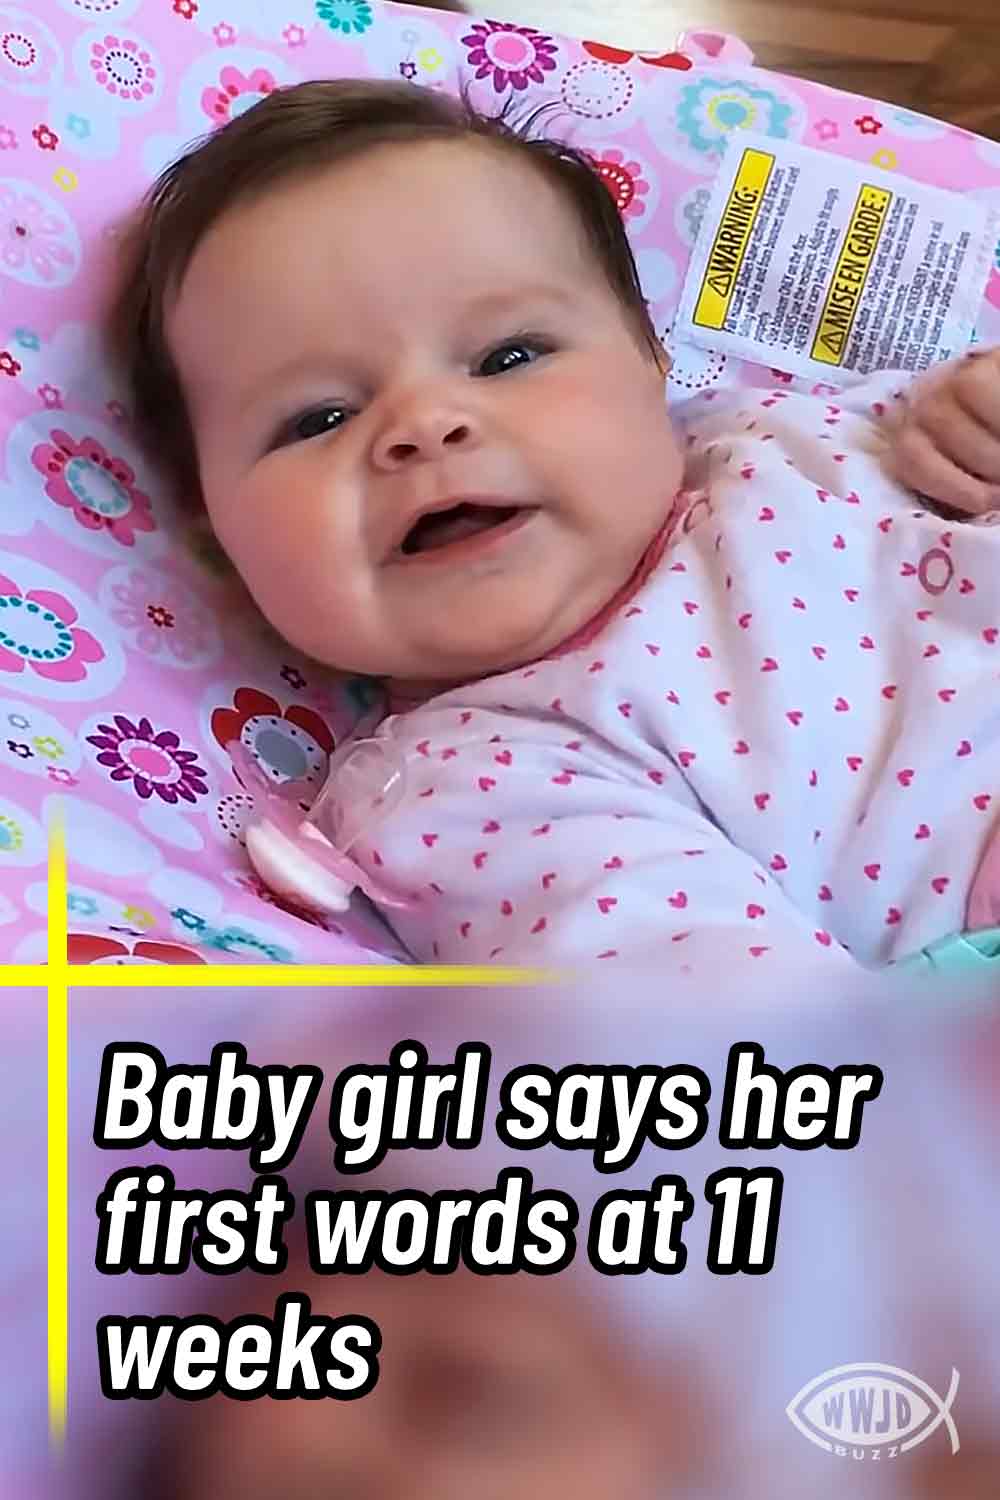 Baby girl says her first words at 11 weeks